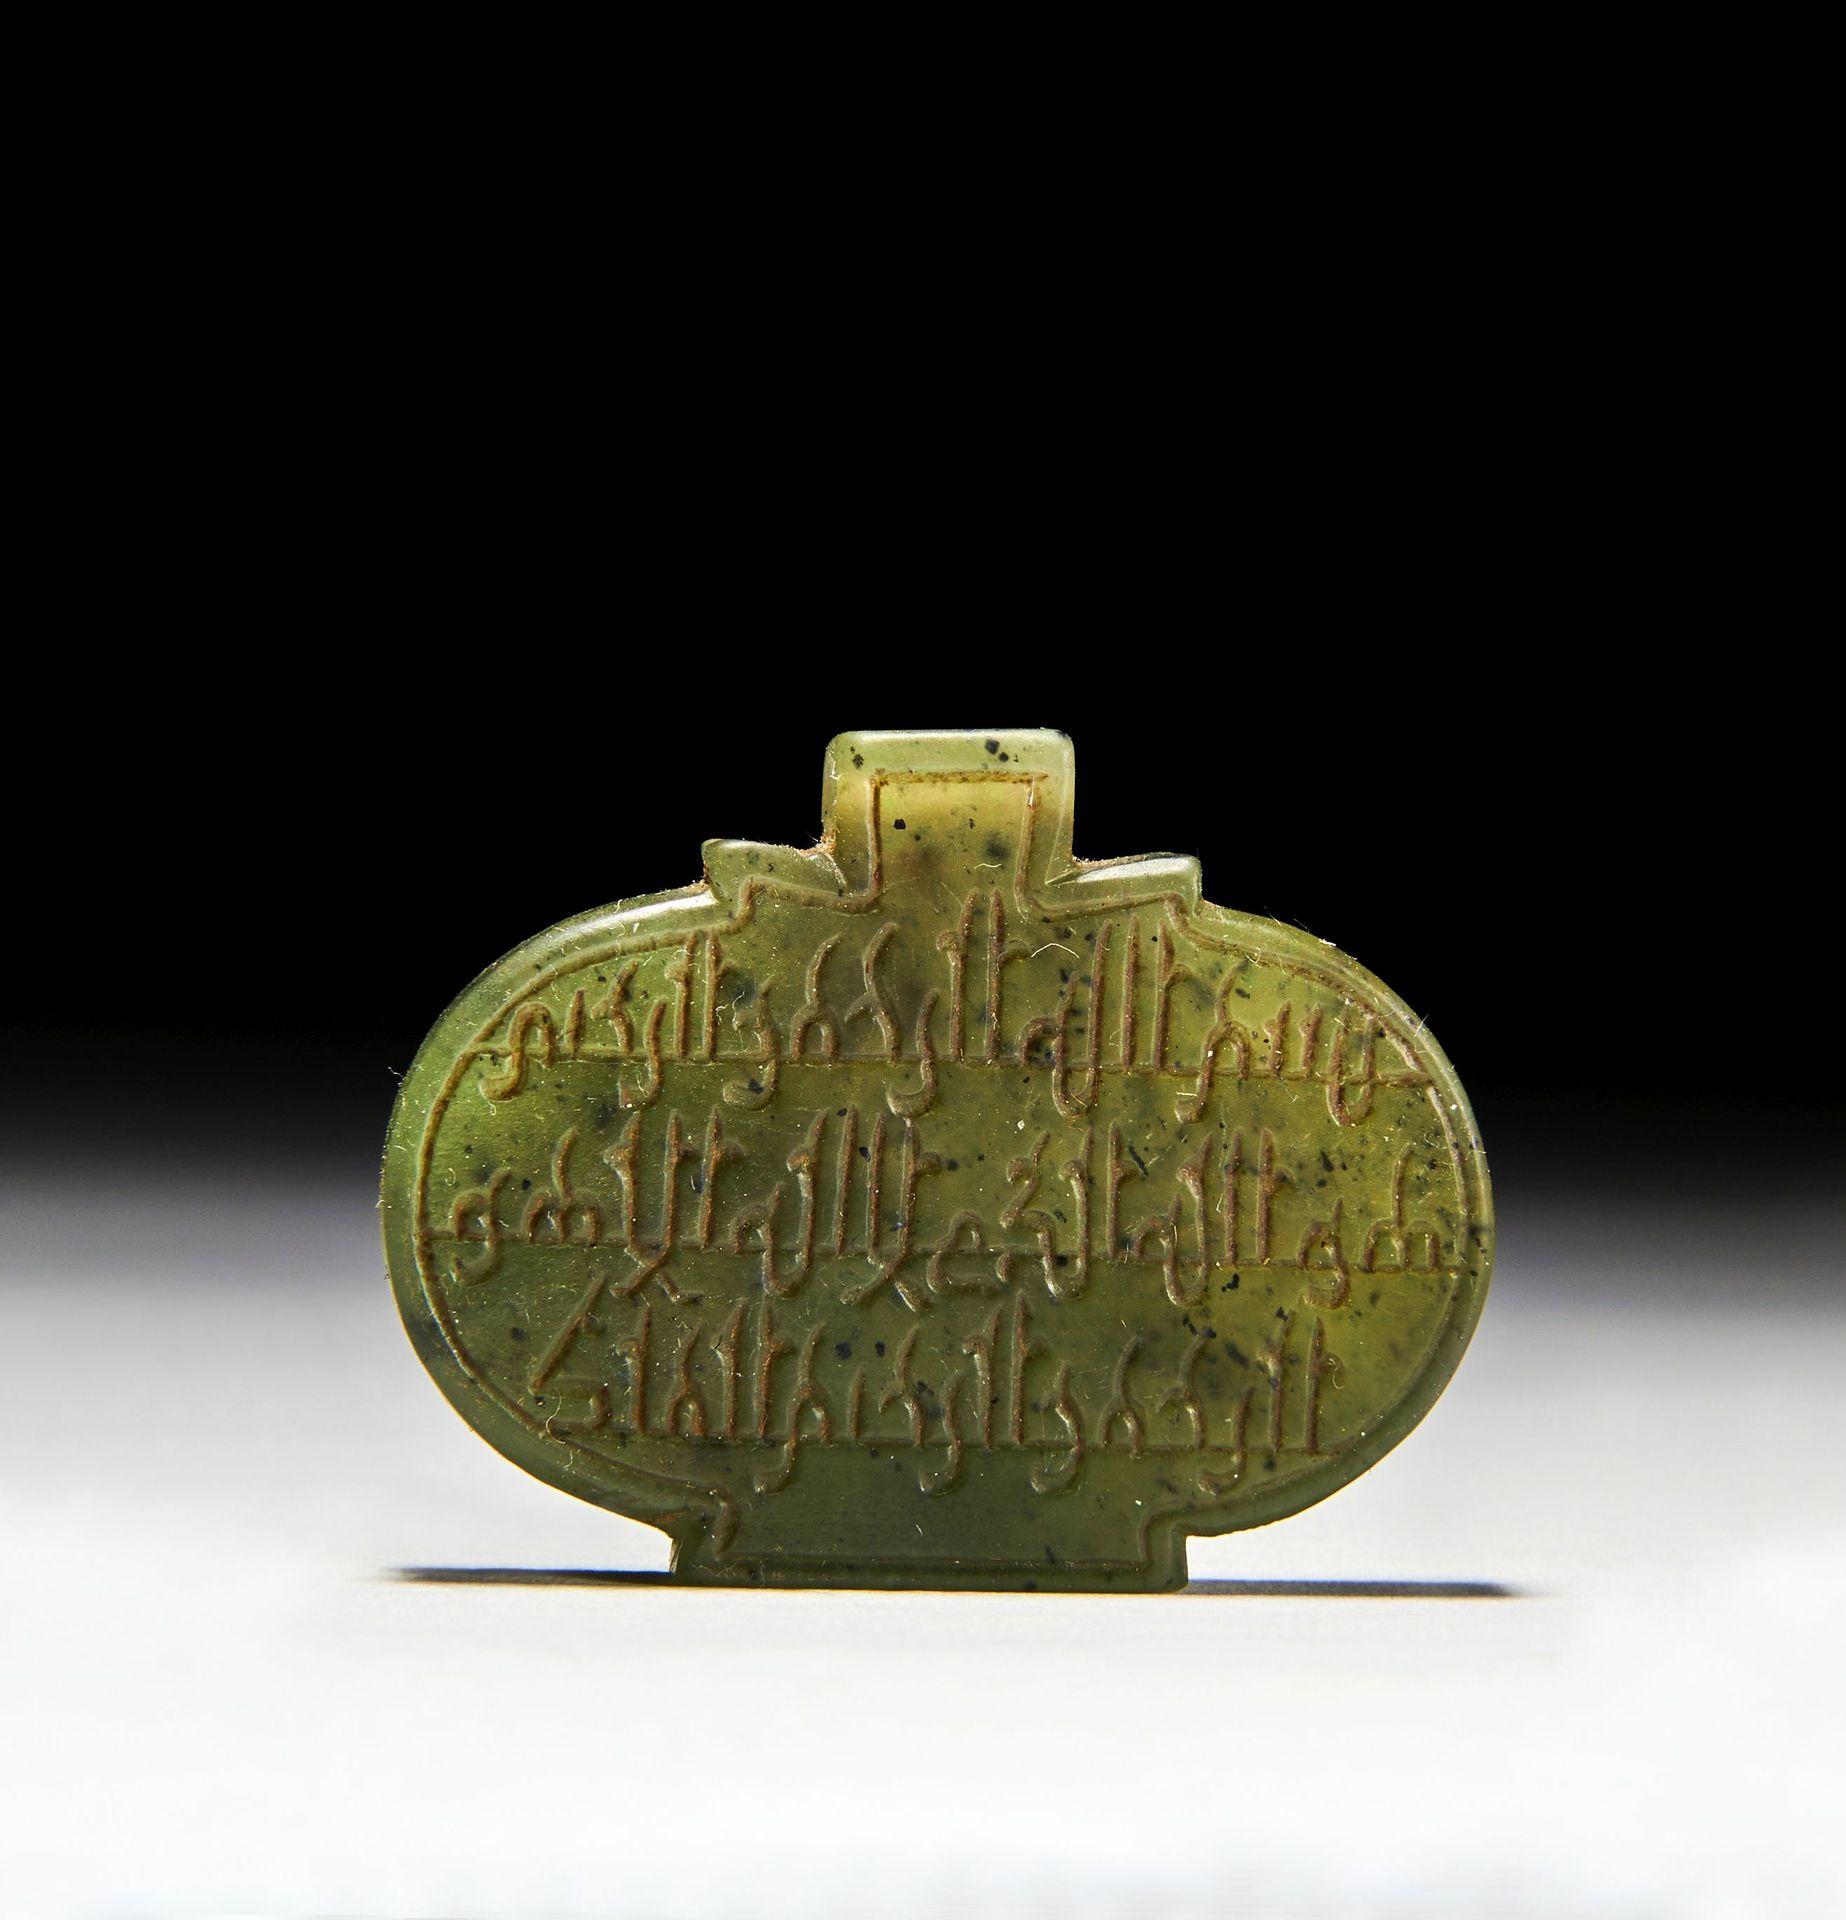 AN ISLAMIC JADE INSCRIBED PENDANT IN KUFIC STYLE TEXT, 19TH CENTURY, PERSIA 伊斯兰教&hellip;